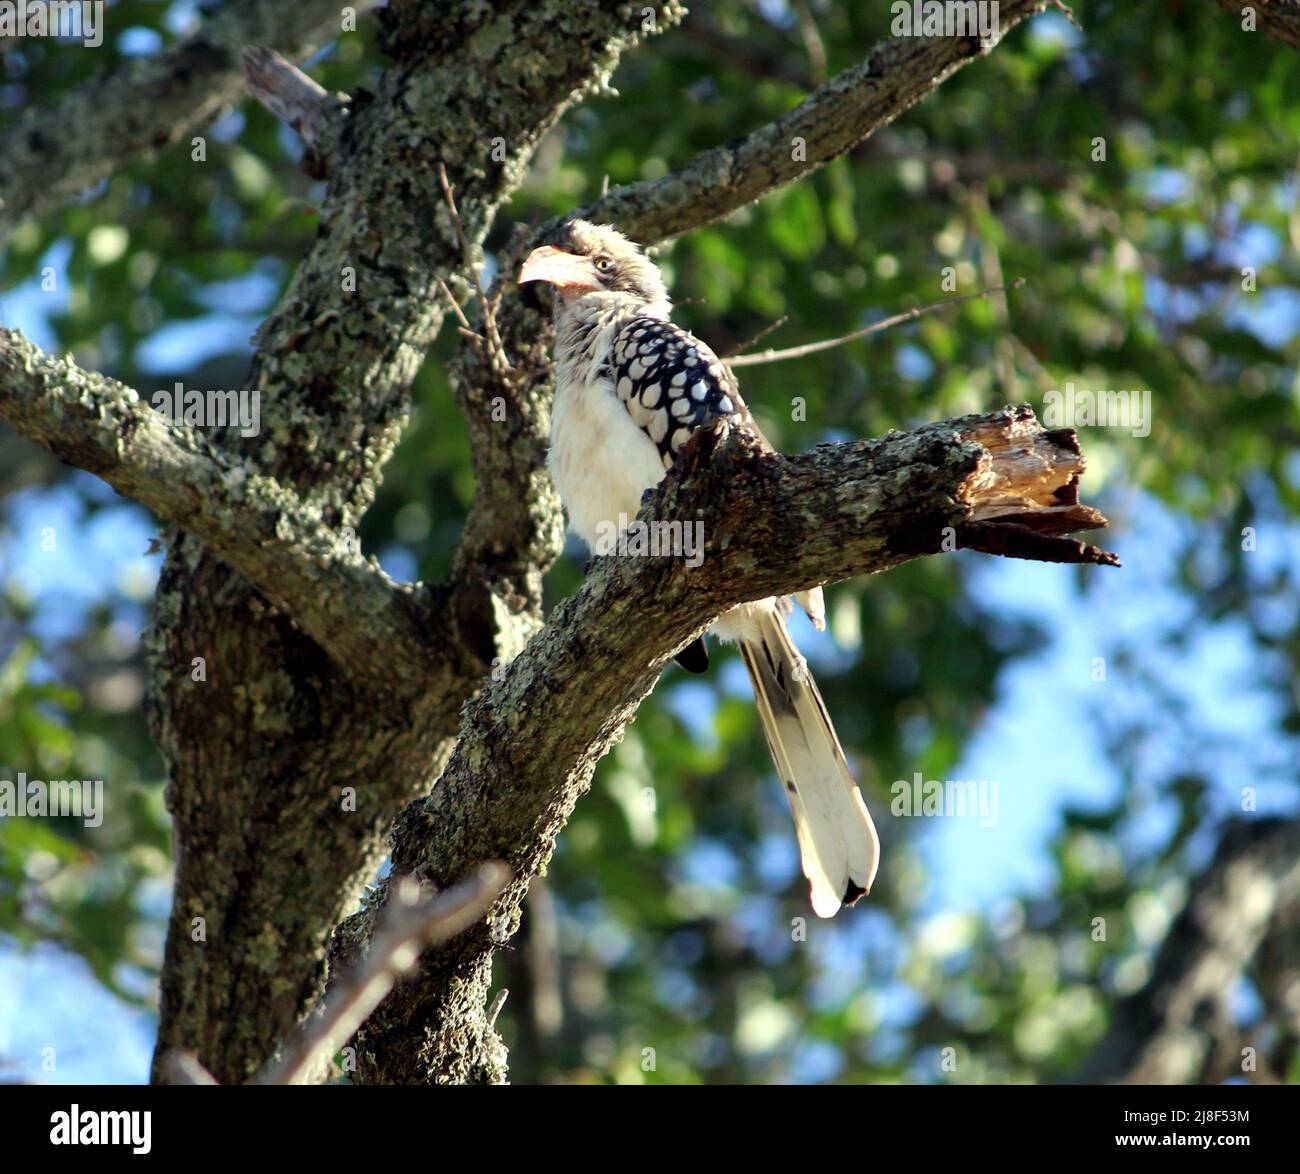 Southern red-billed hornbill (Tockus rufirostris) surveying the surrounding from a perch on a tree : (pix SShukla) Stock Photo